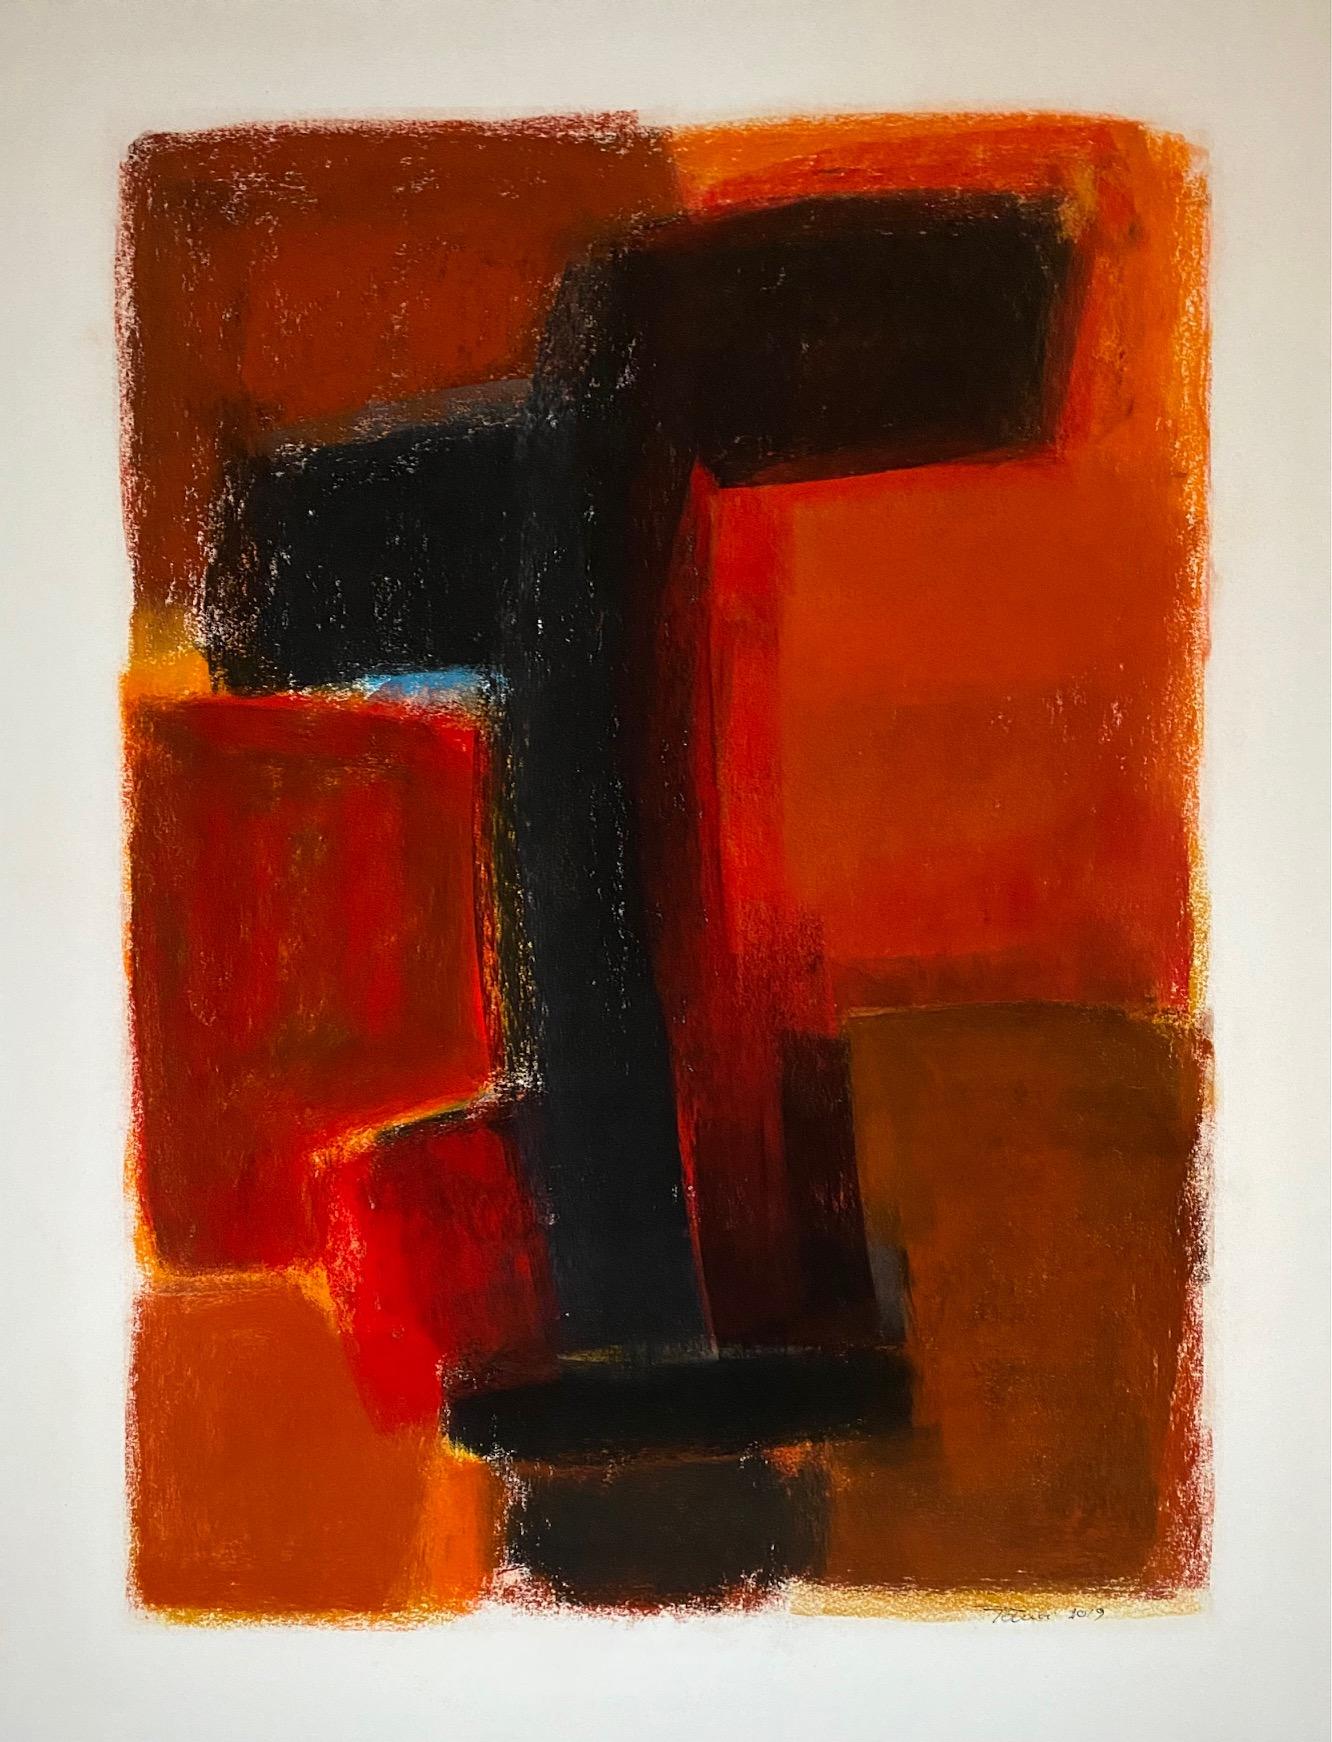 Pastel and acrylic work on fine art paper 
Brown wooden frame
Total size with the frame: 84x68cm

Born in 1944 in the canton of Fribourg, Gilbert Pauli currently lives in Geneva, where he devotes himself to painting and sculpture, a passion he